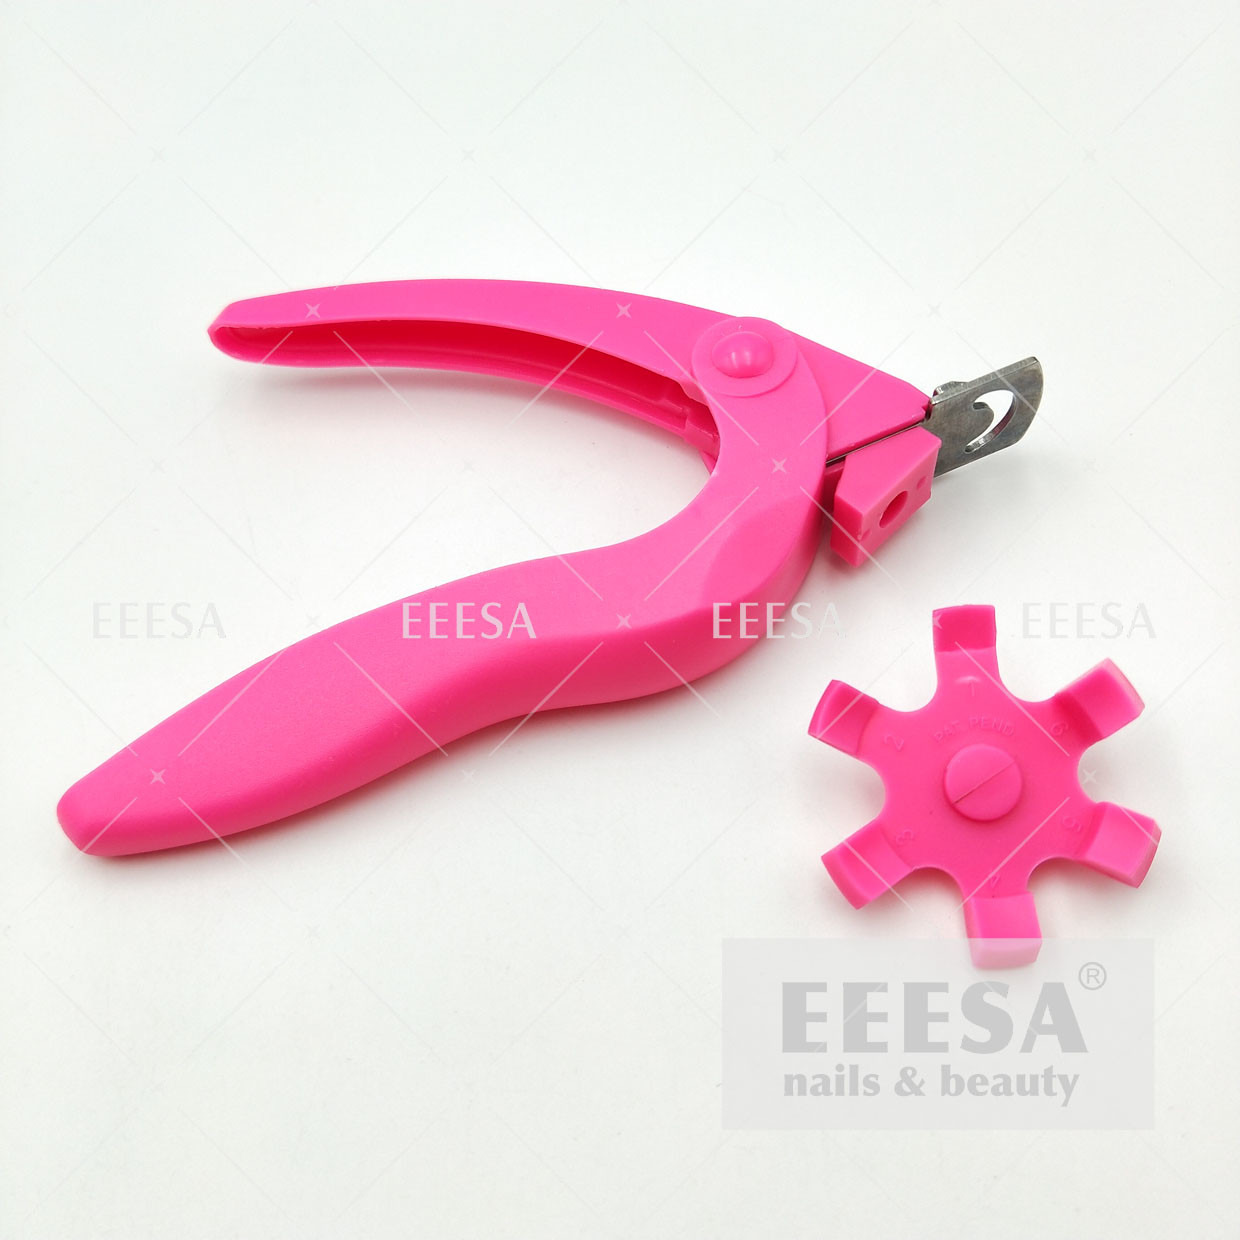  Manicure Tool Nails Art Scissors Trimmer Acrylic Tip Cutter Nail Dial Triple Cut Manufactures